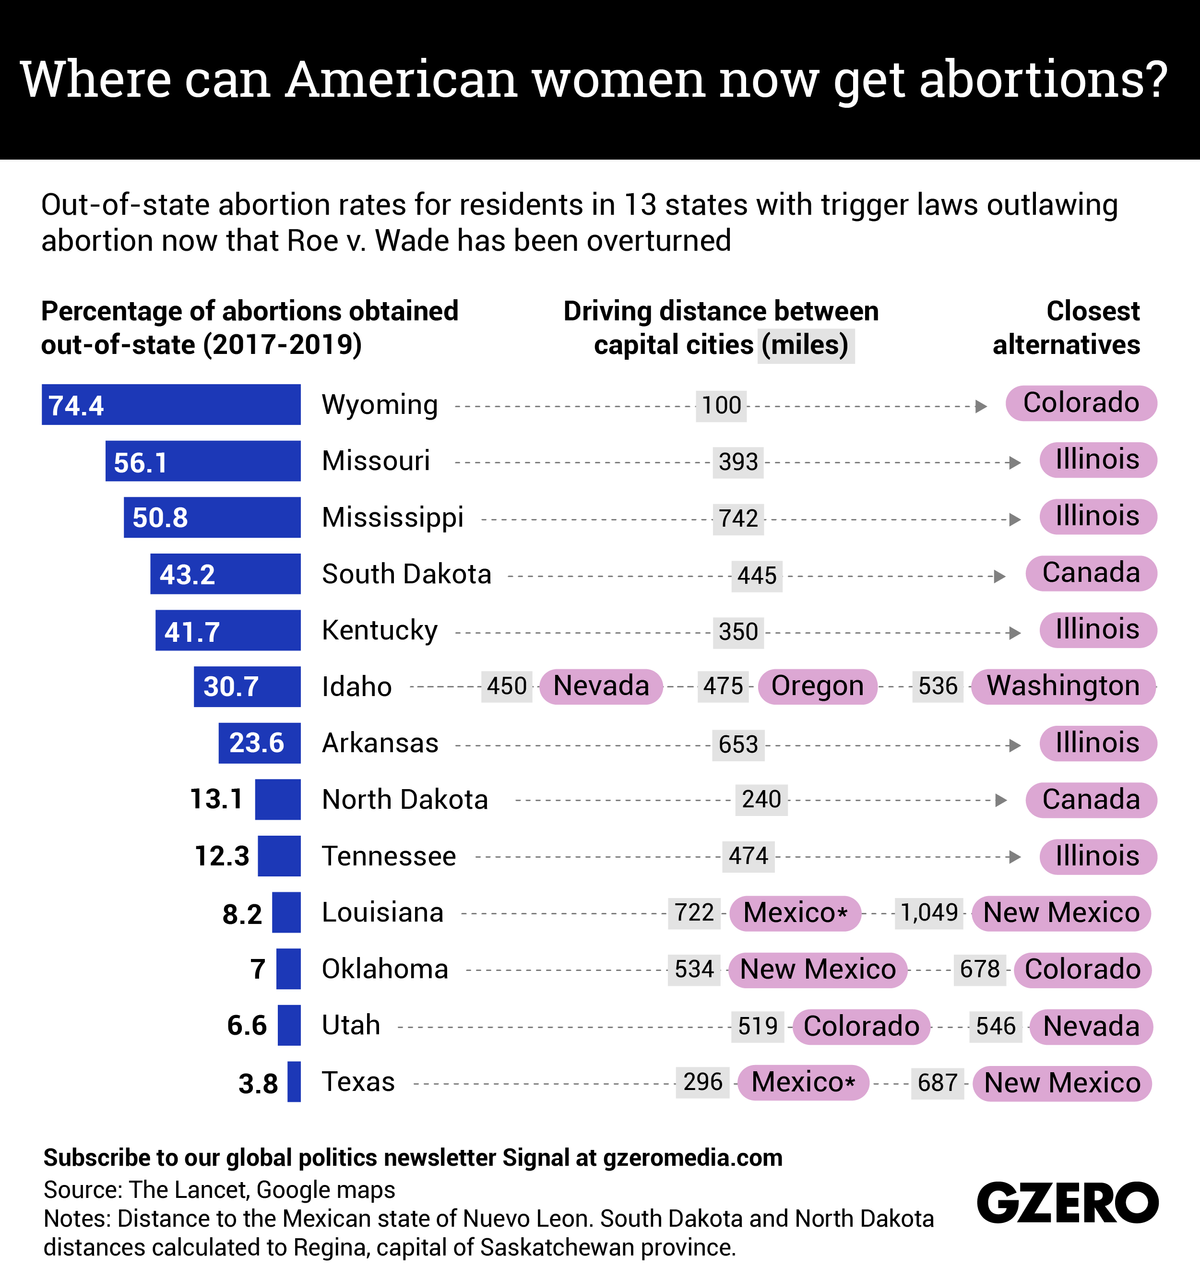 Where can women now get abortions?